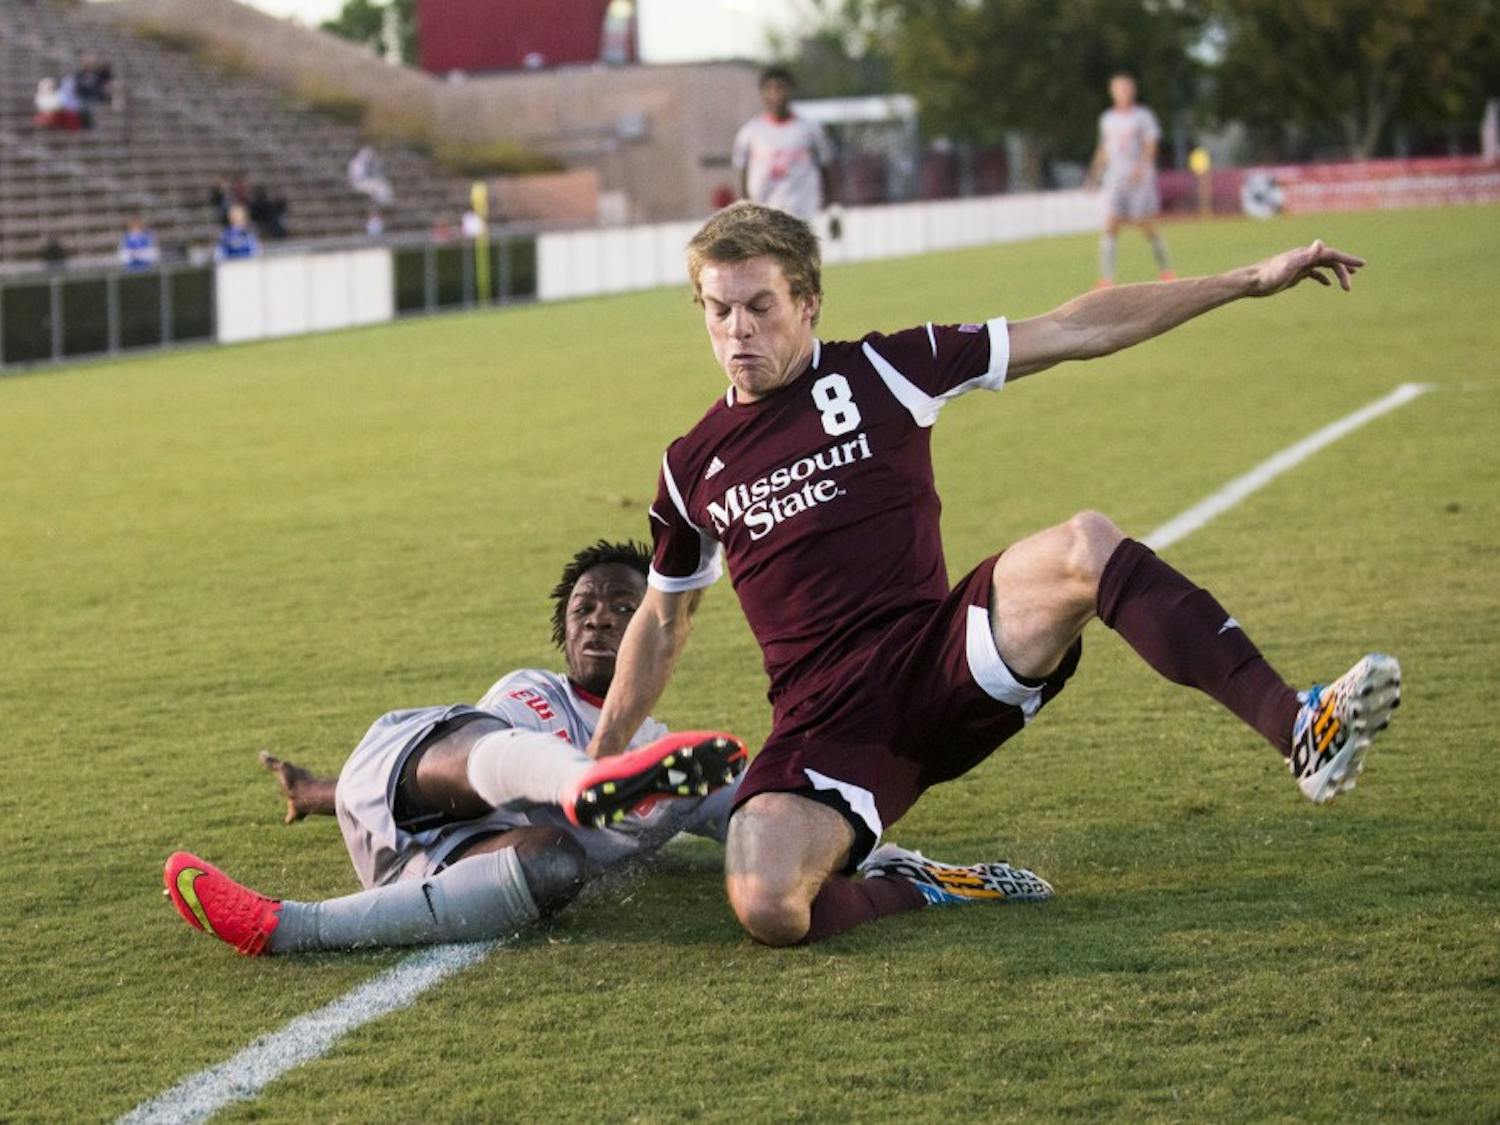 New Mexico forward James Rogers (7) kicks the ball away from Missouri State midfielder Parker Maher during the Oct. 12 game. New Mexico will play Old Dominion at 7 p.m. on Saturday at the UNM Soccer Complex.